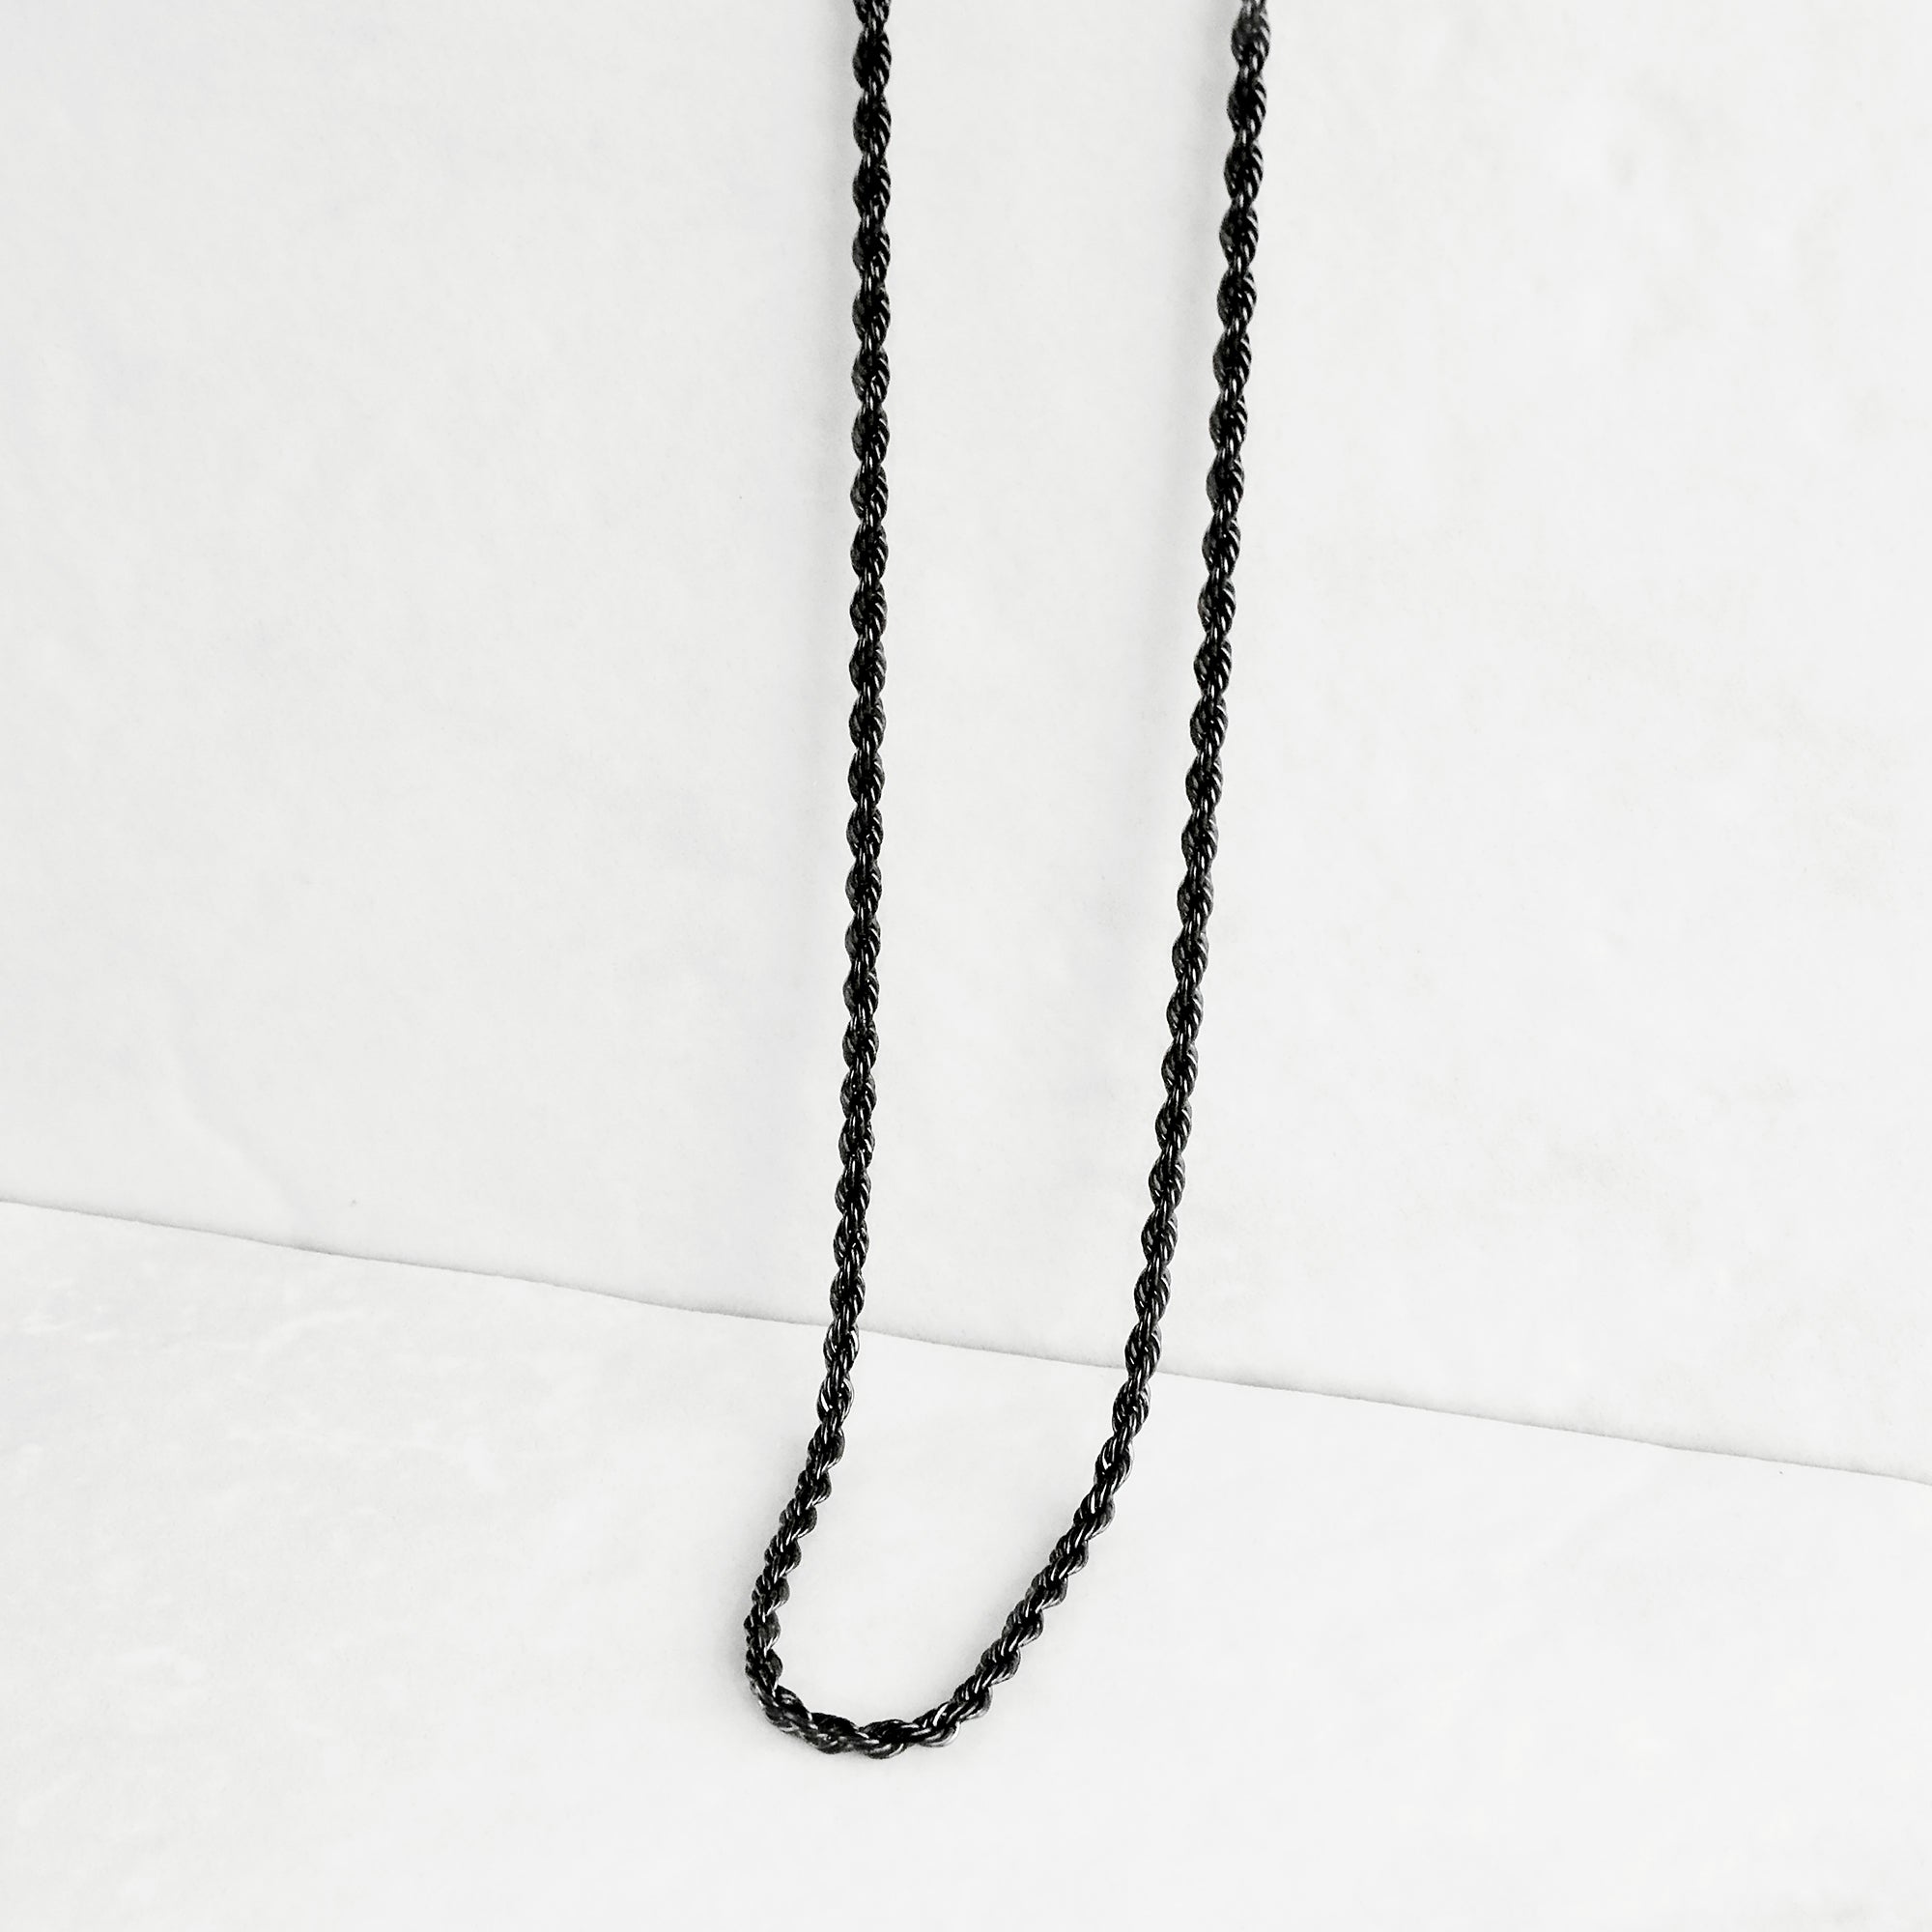 Rope Chain Necklace - Black 2.5mm